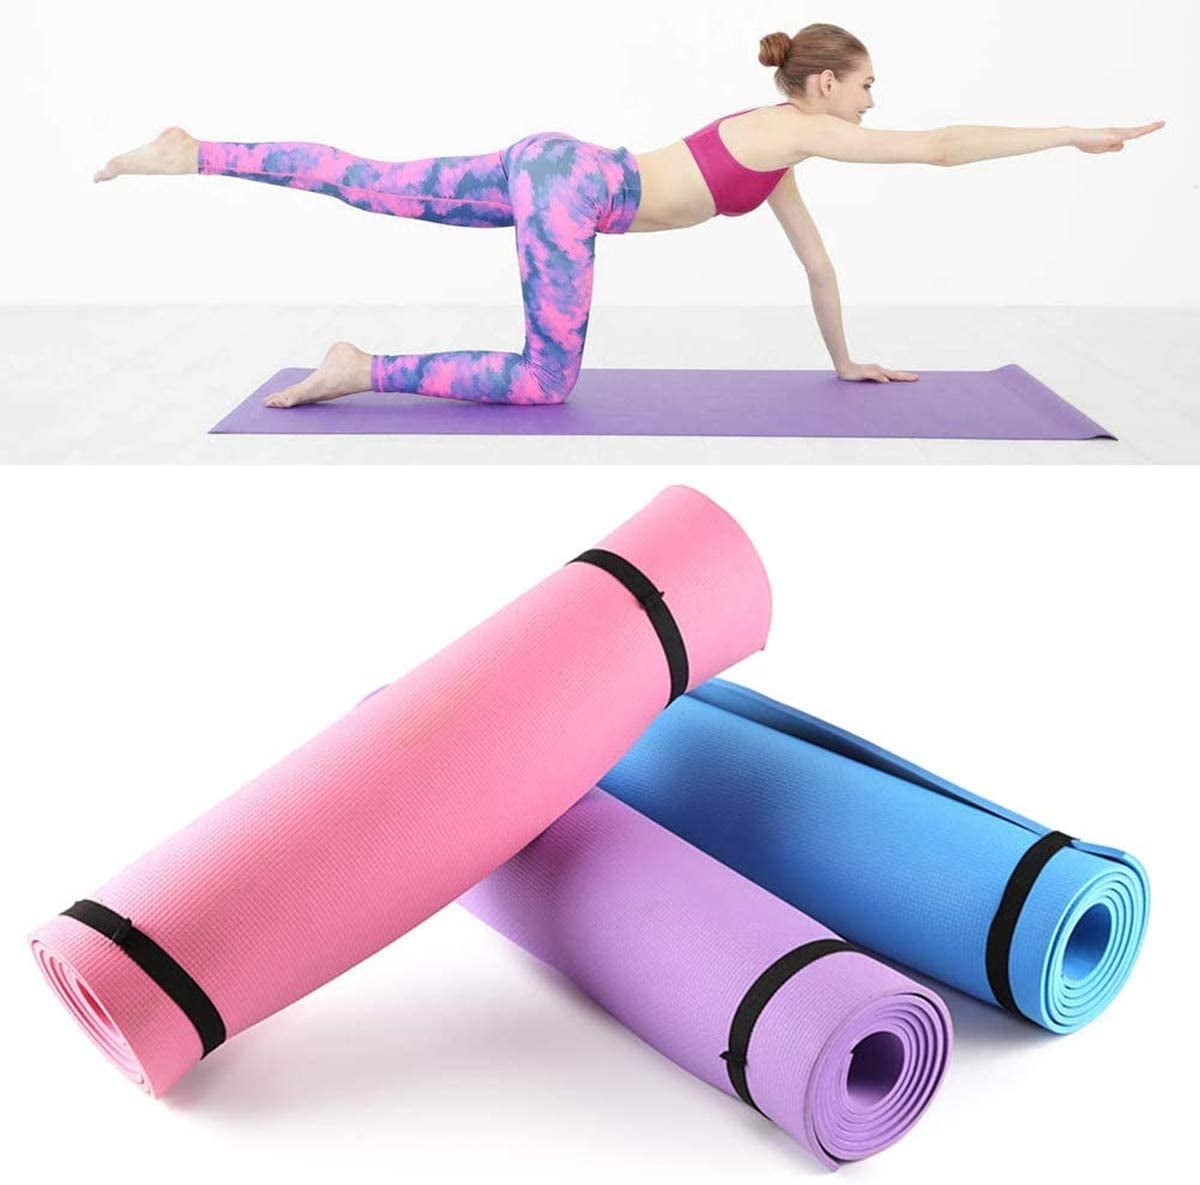 Gaiam Yoga Mat 68 x 24 x 4mm or 6mm Thick Solid Color Exercise & Fitness Mat for All Types of Yoga Pilates & Floor Workouts 